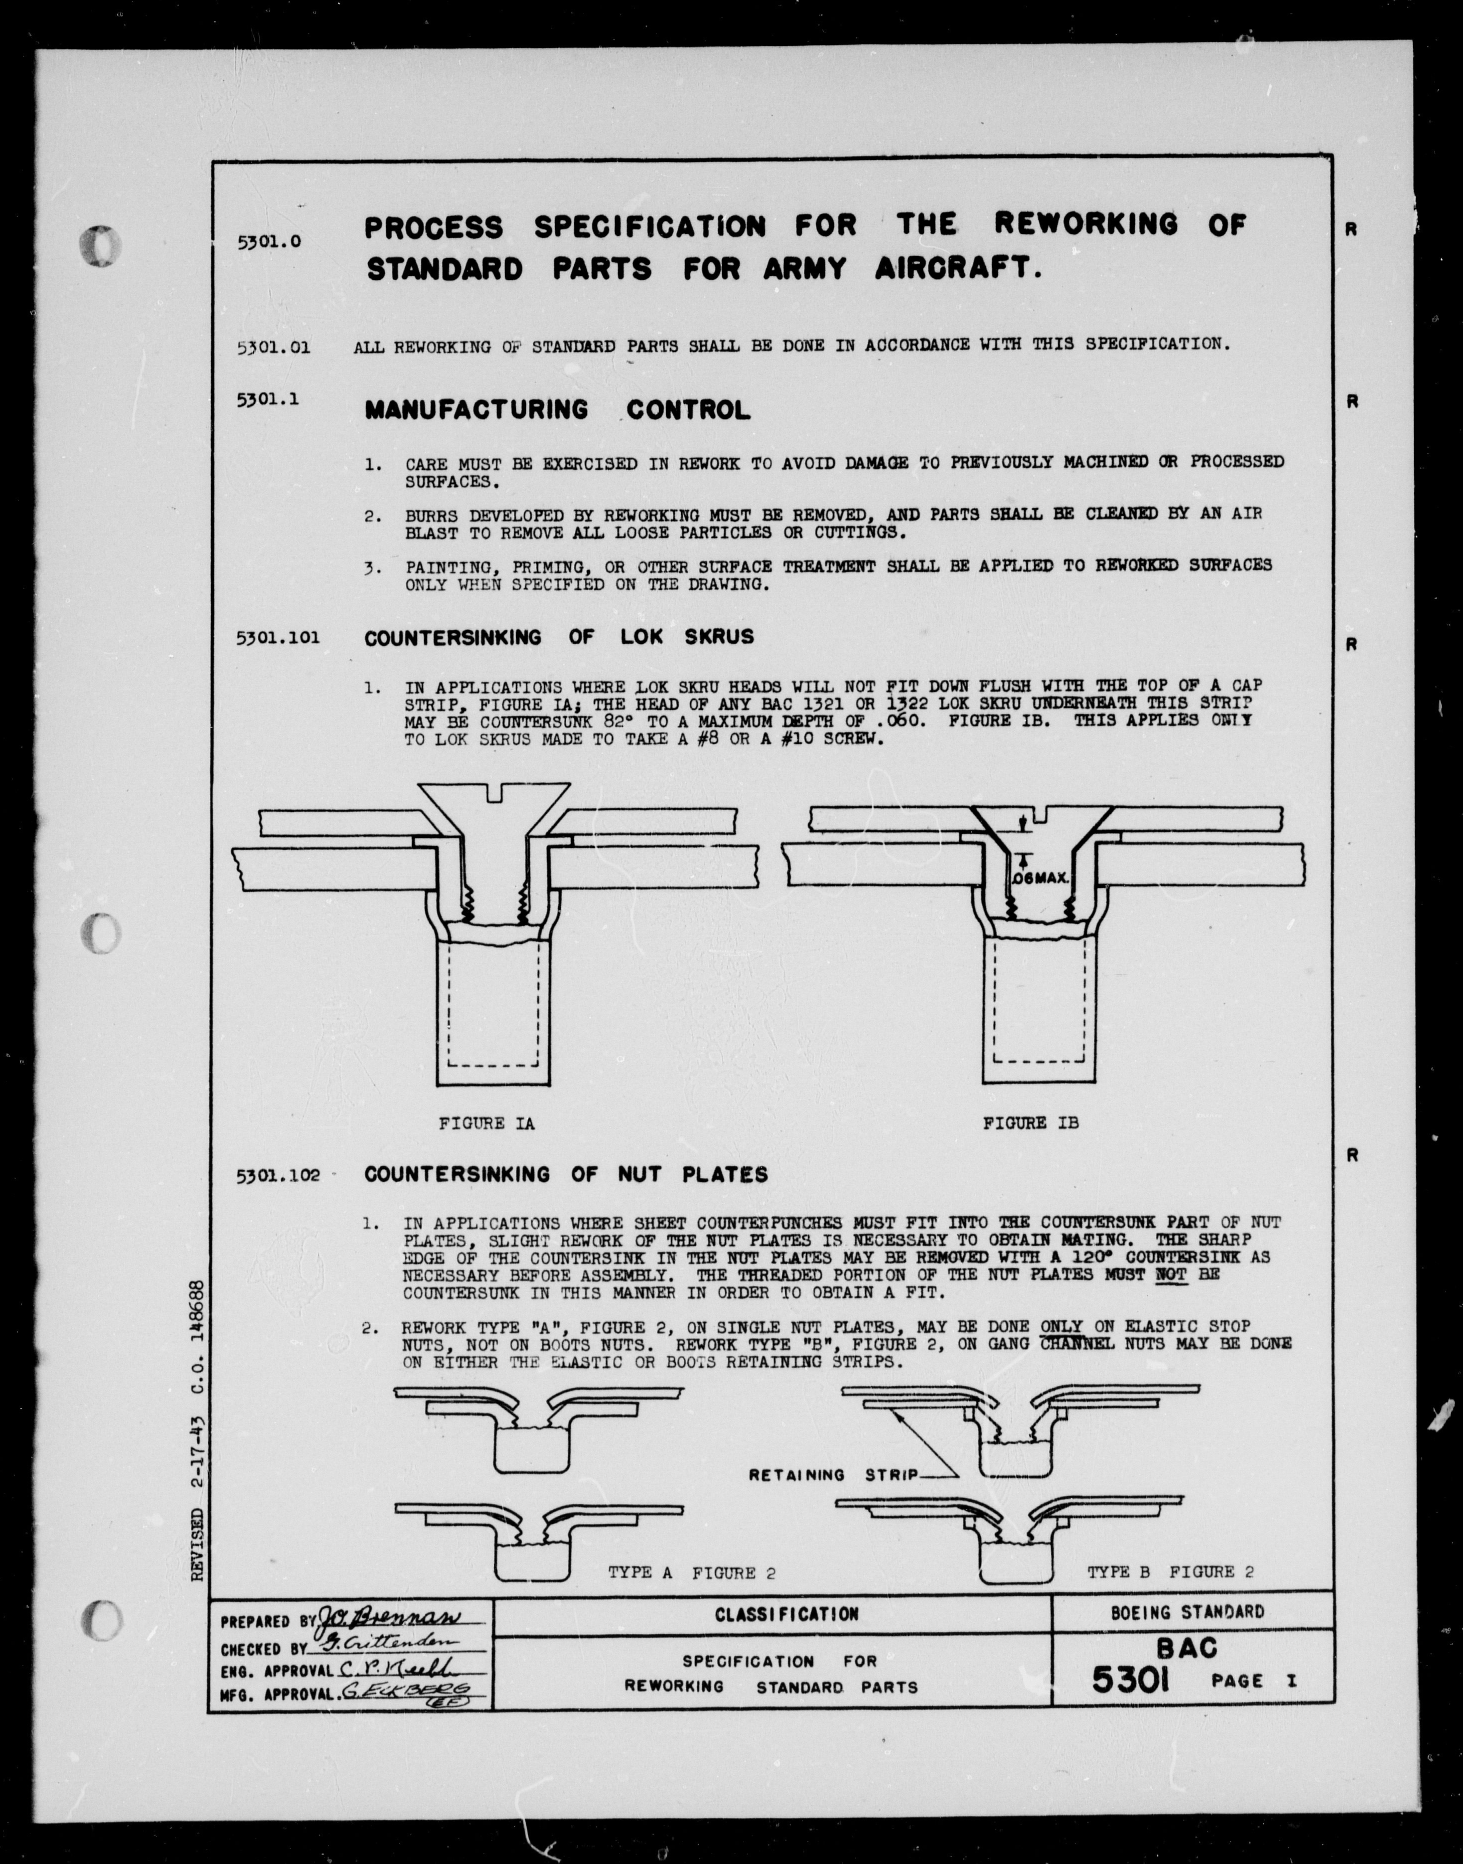 Sample page 1 from AirCorps Library document: Specification for Reworking Standard Parts